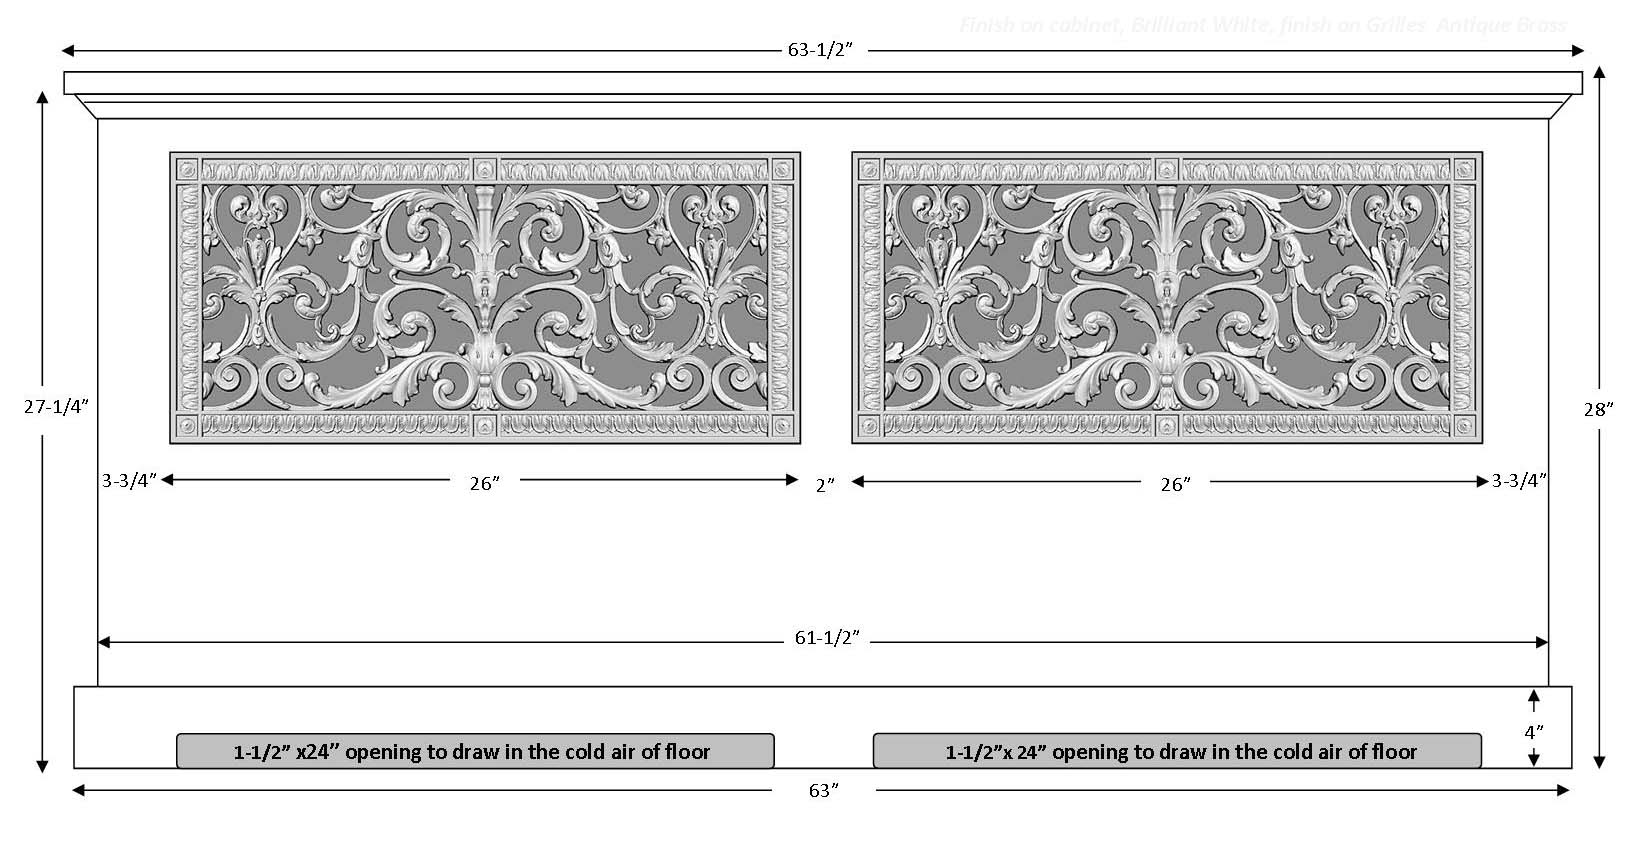 Radiator Cover Design with French Style Louis XIV 3-dimensional radiator grilles